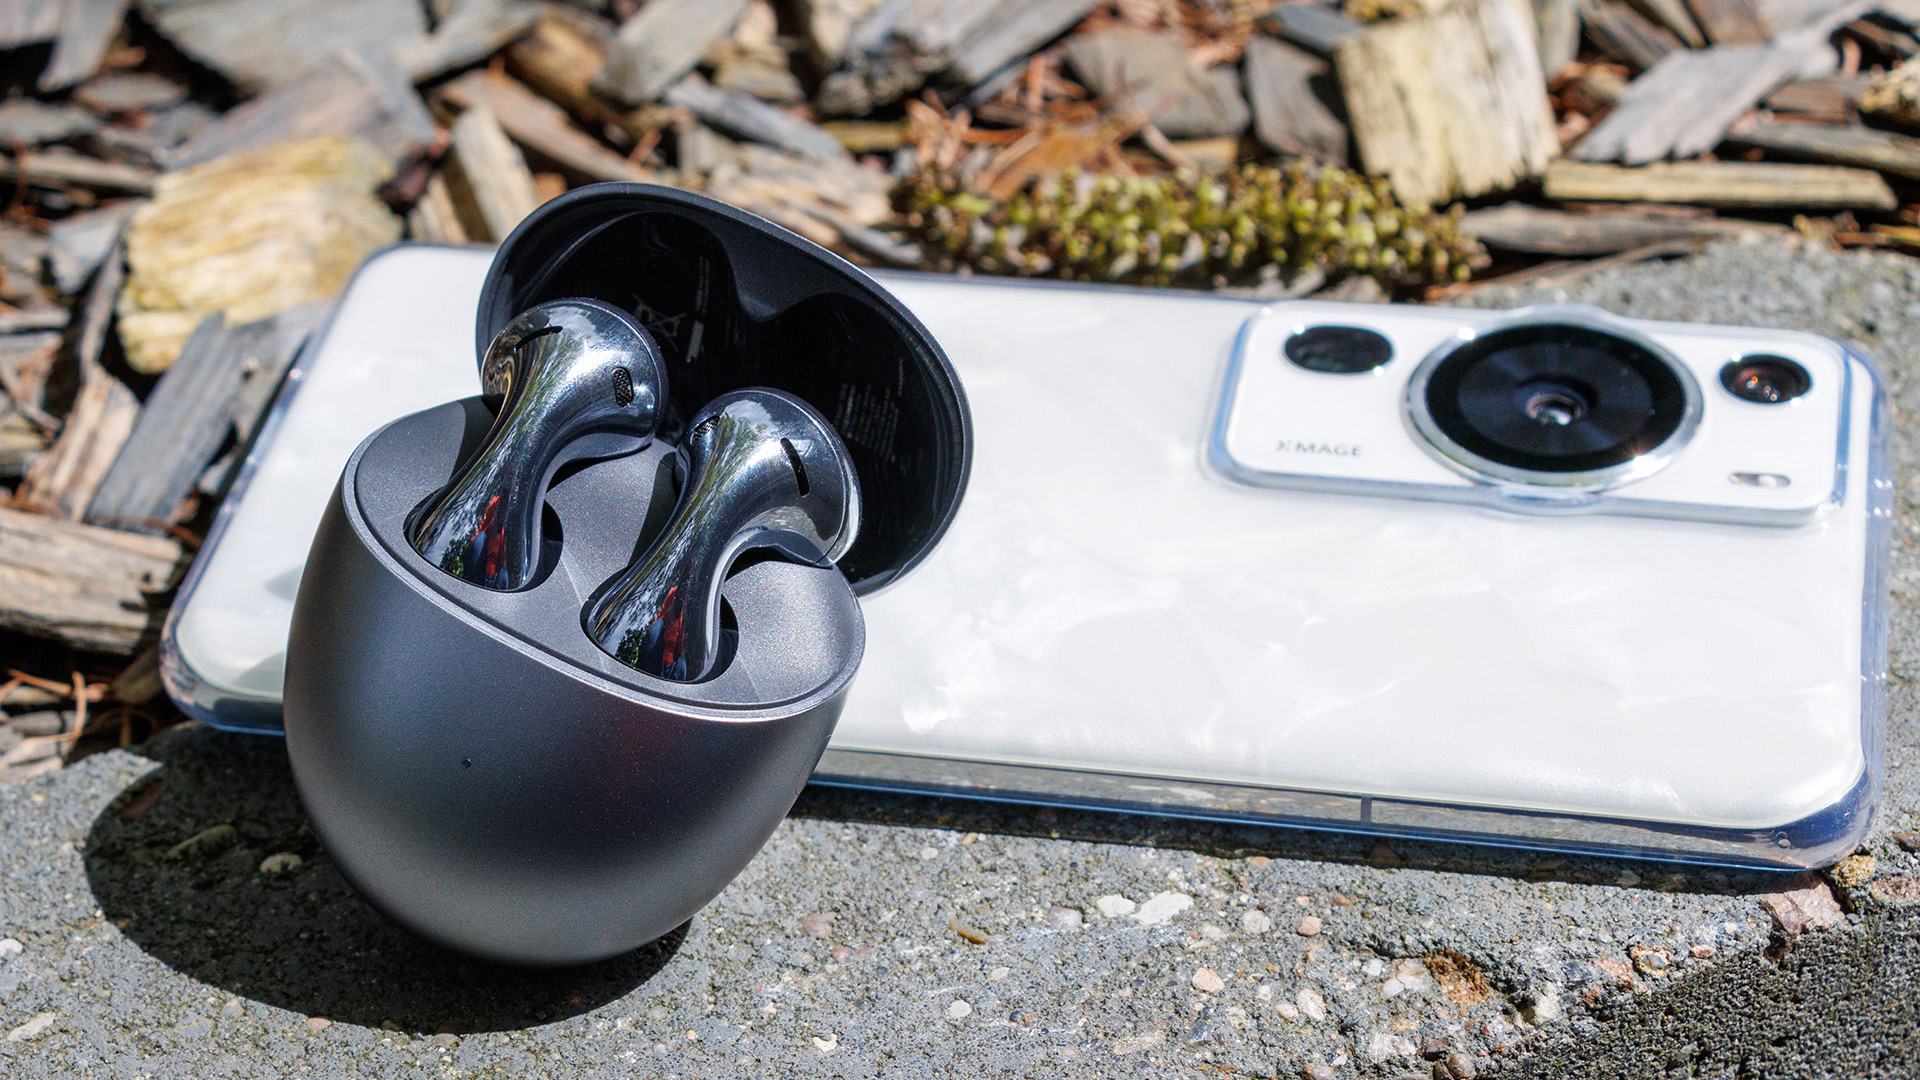 Huawei FreeBuds 5 review: Open-fit freedom